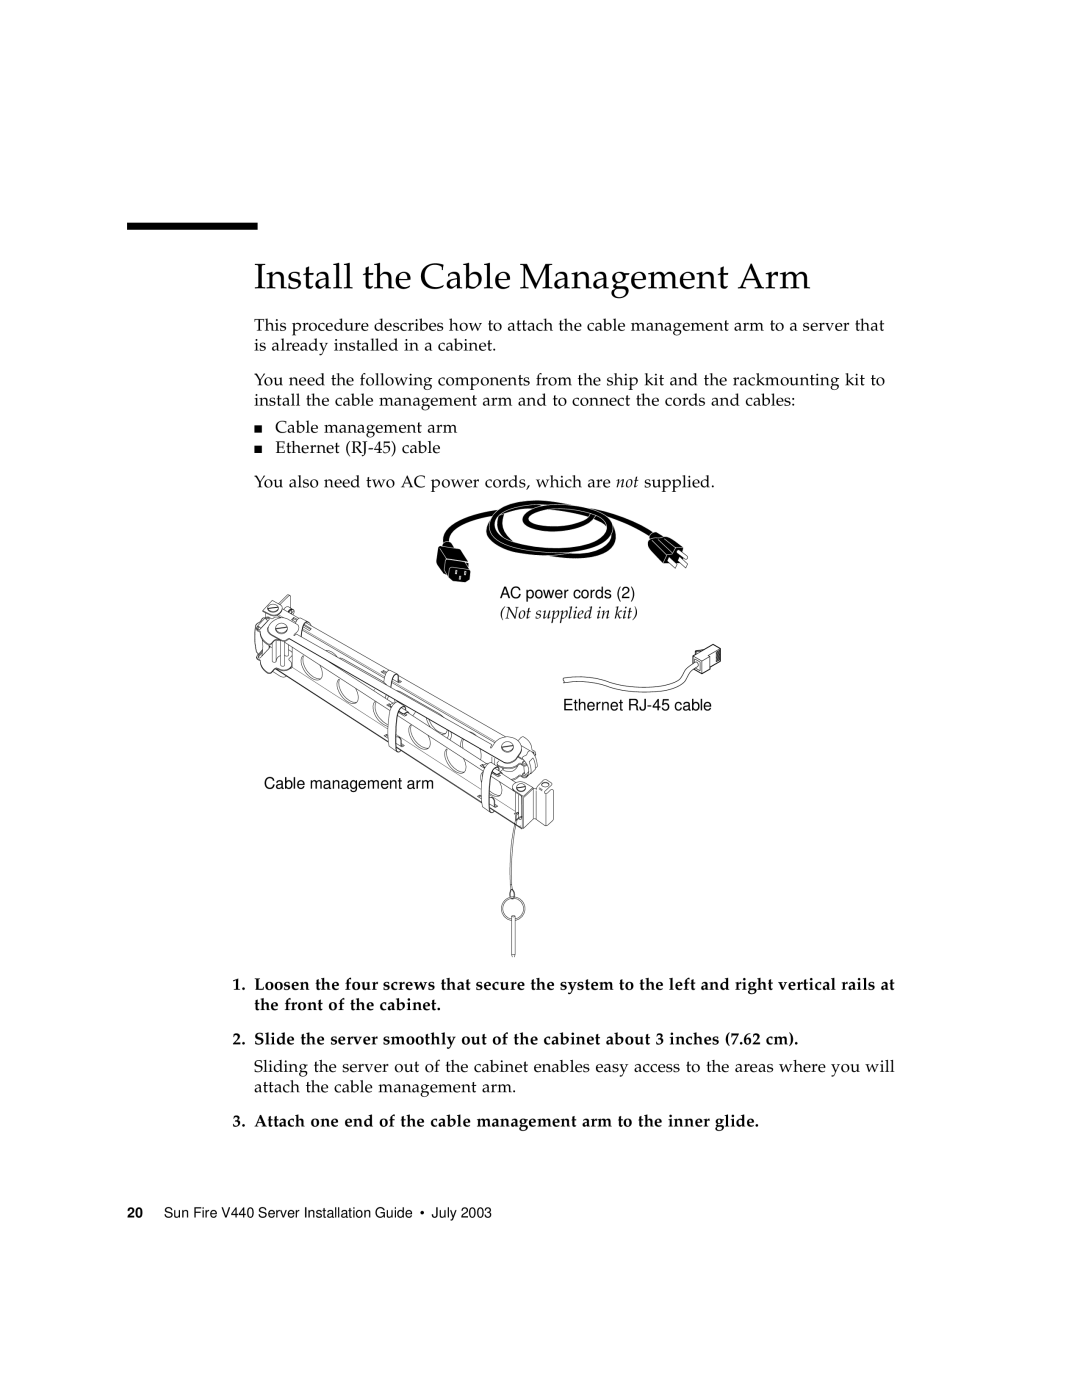 Sun Microsystems 816-7727-10 manual Install the Cable Management Arm, Not supplied in kit 